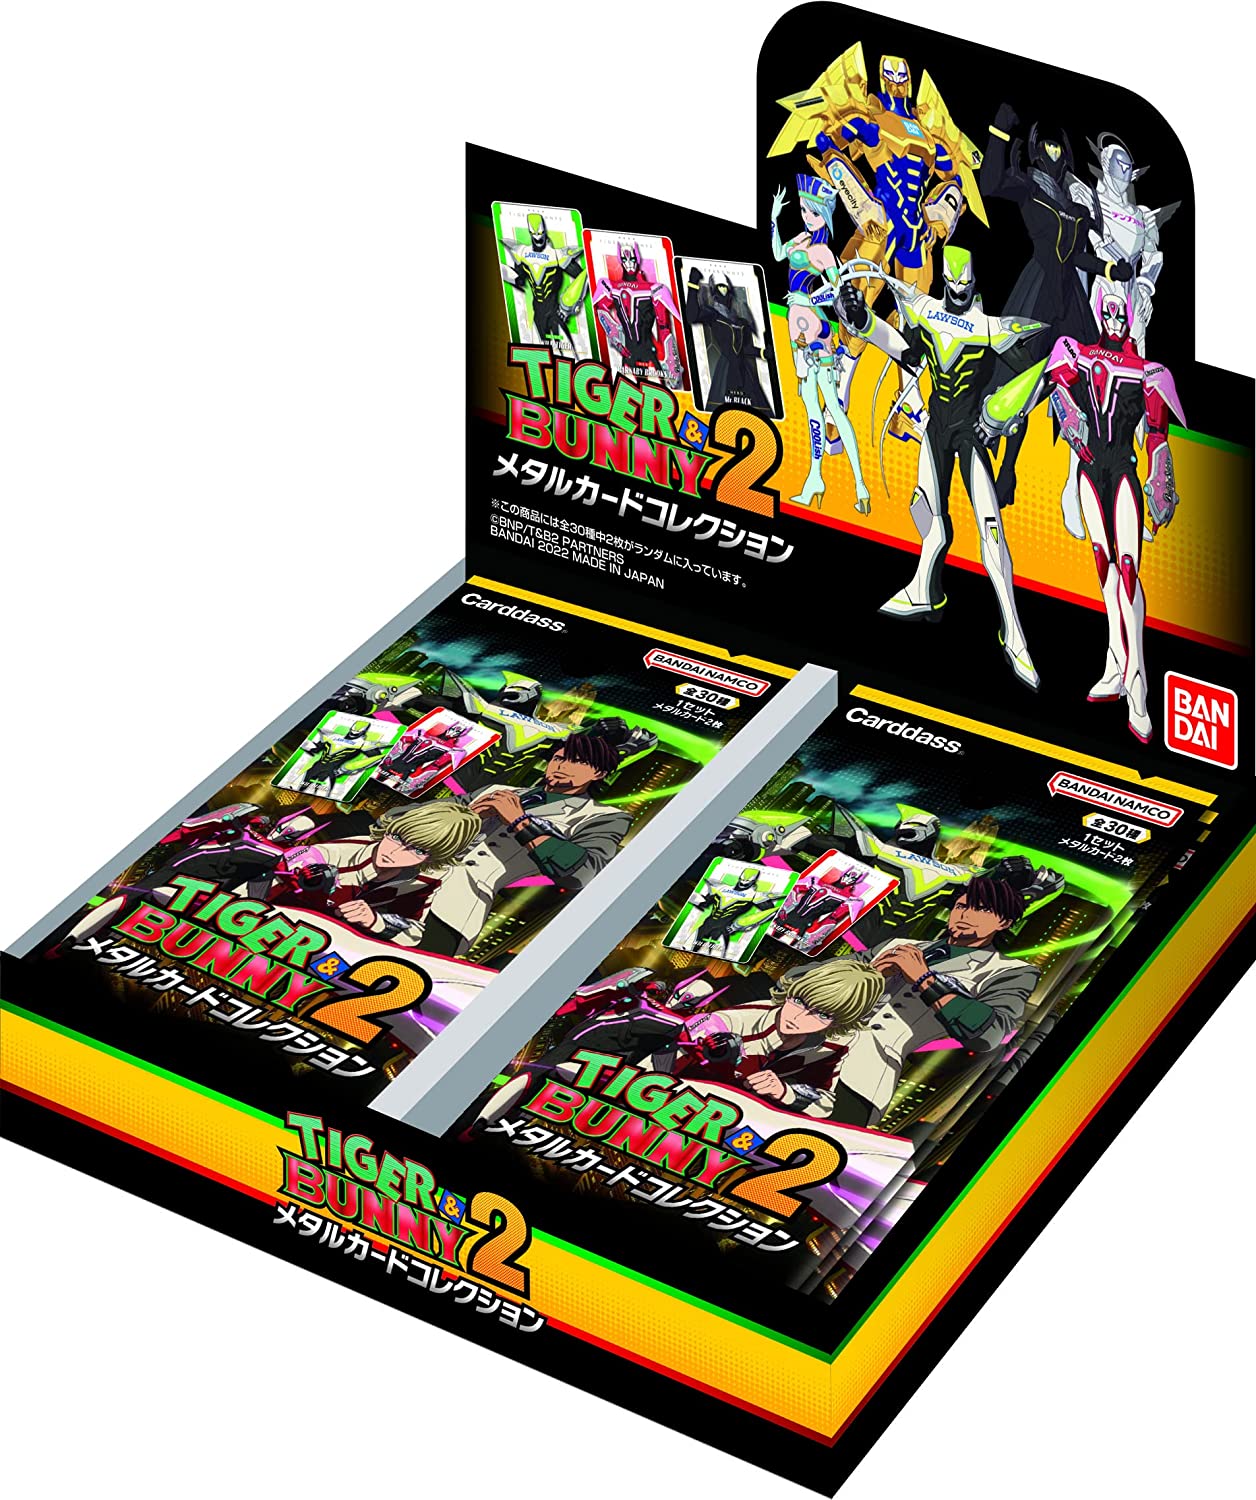 TIGER & BUNNY 2 Metal Card Collection - Box  Release date: June 24 2022  20 booster pack / box  2 cards / booster pack